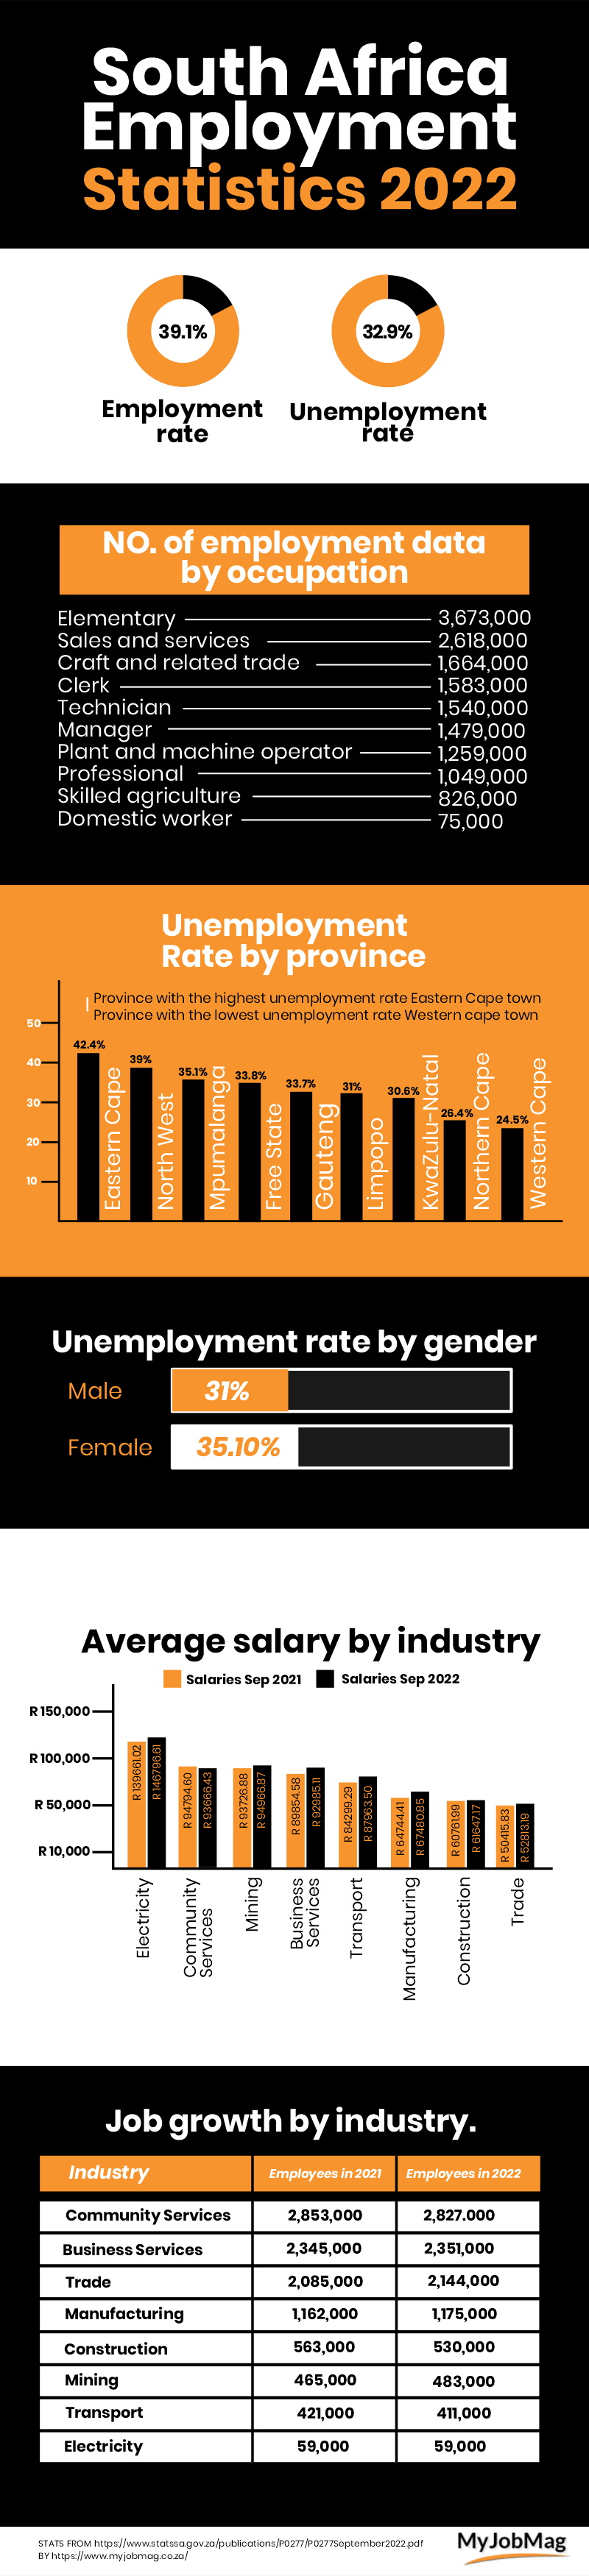 Unemployment Rate in South Africa 